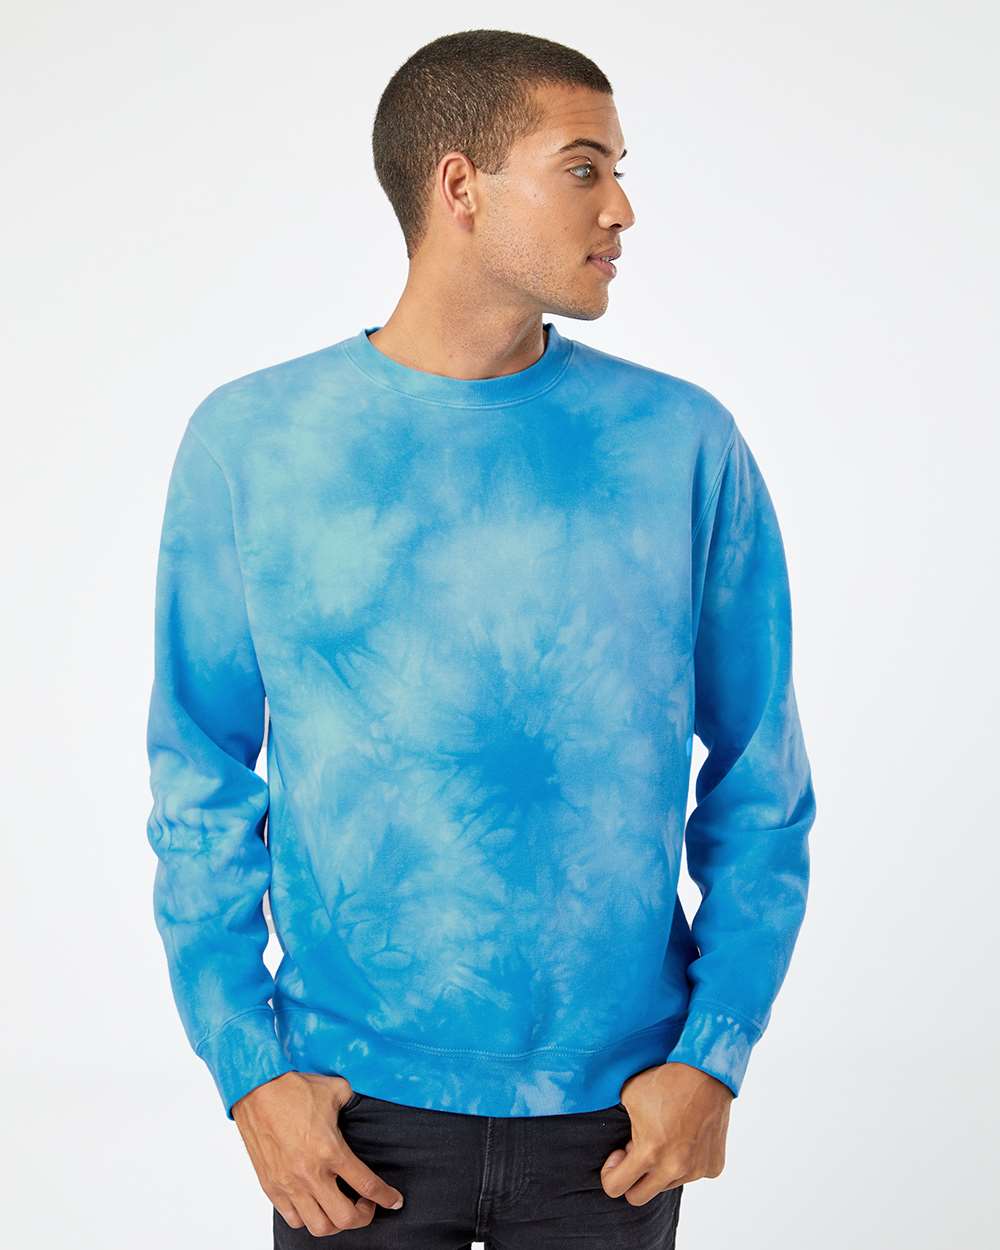 [NEW] Independent Trading Co. Unisex Midweight Tie-Dyed Crewneck Sweatshirt